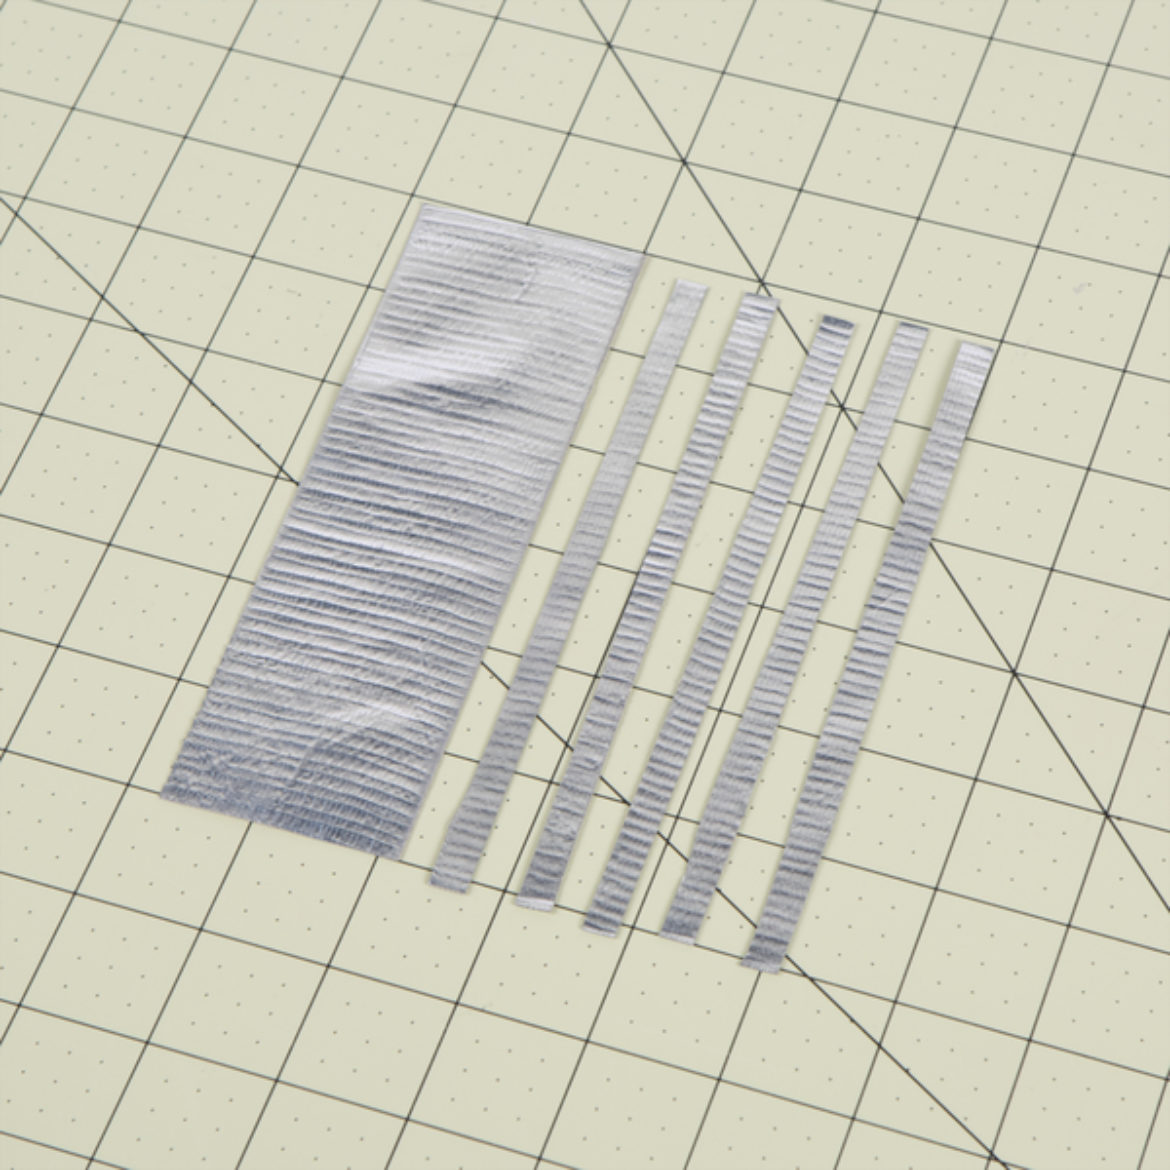 Strip of tape folded over itself length wise and cut into thin strips